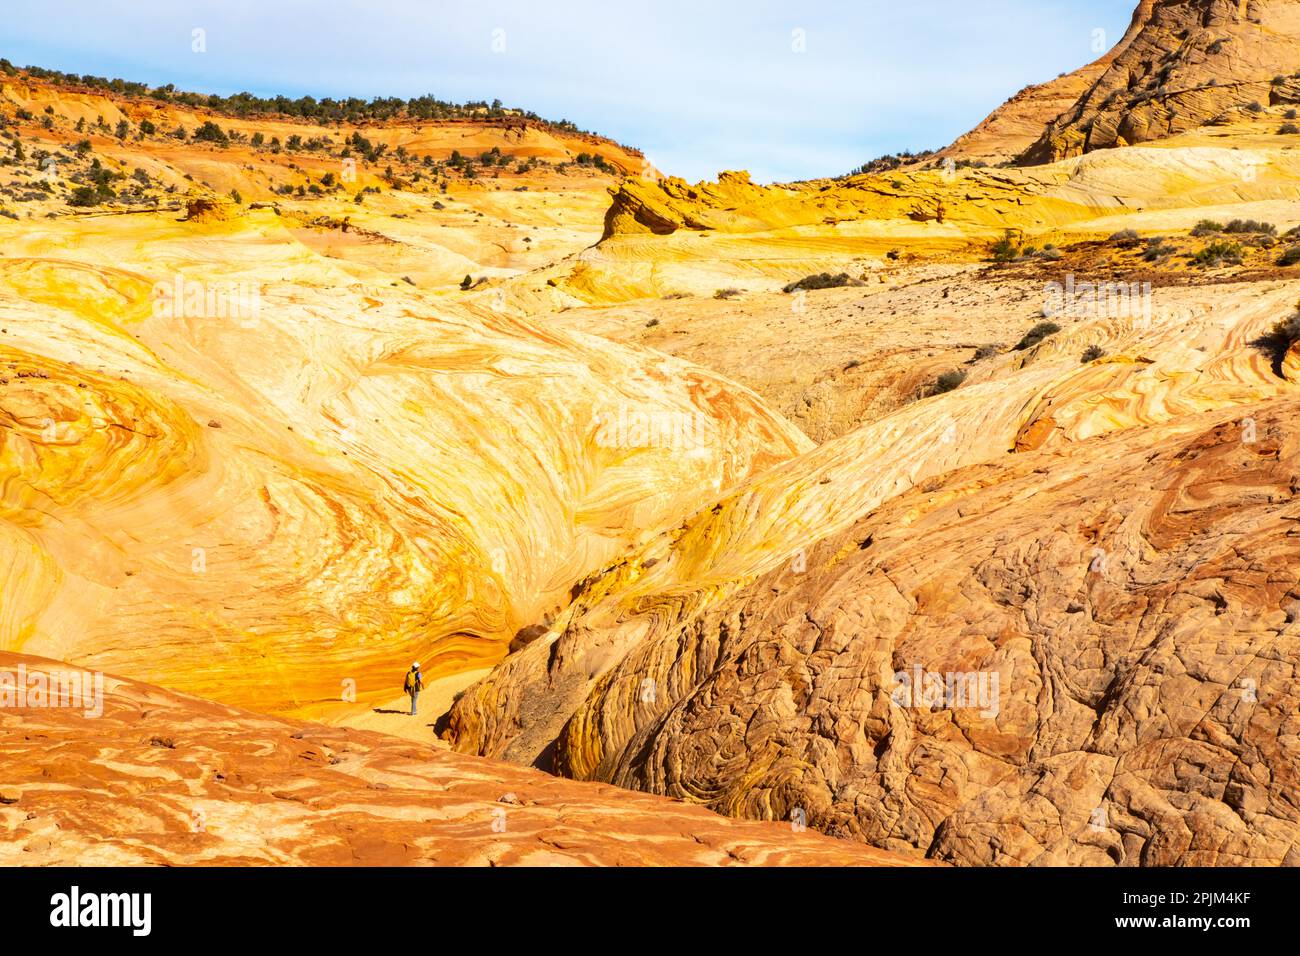 USA, Utah, Grand Staircase Escalante National Monument. Rocky landscape of Bighorn Canyon. (Editorial Use Only) Stock Photo